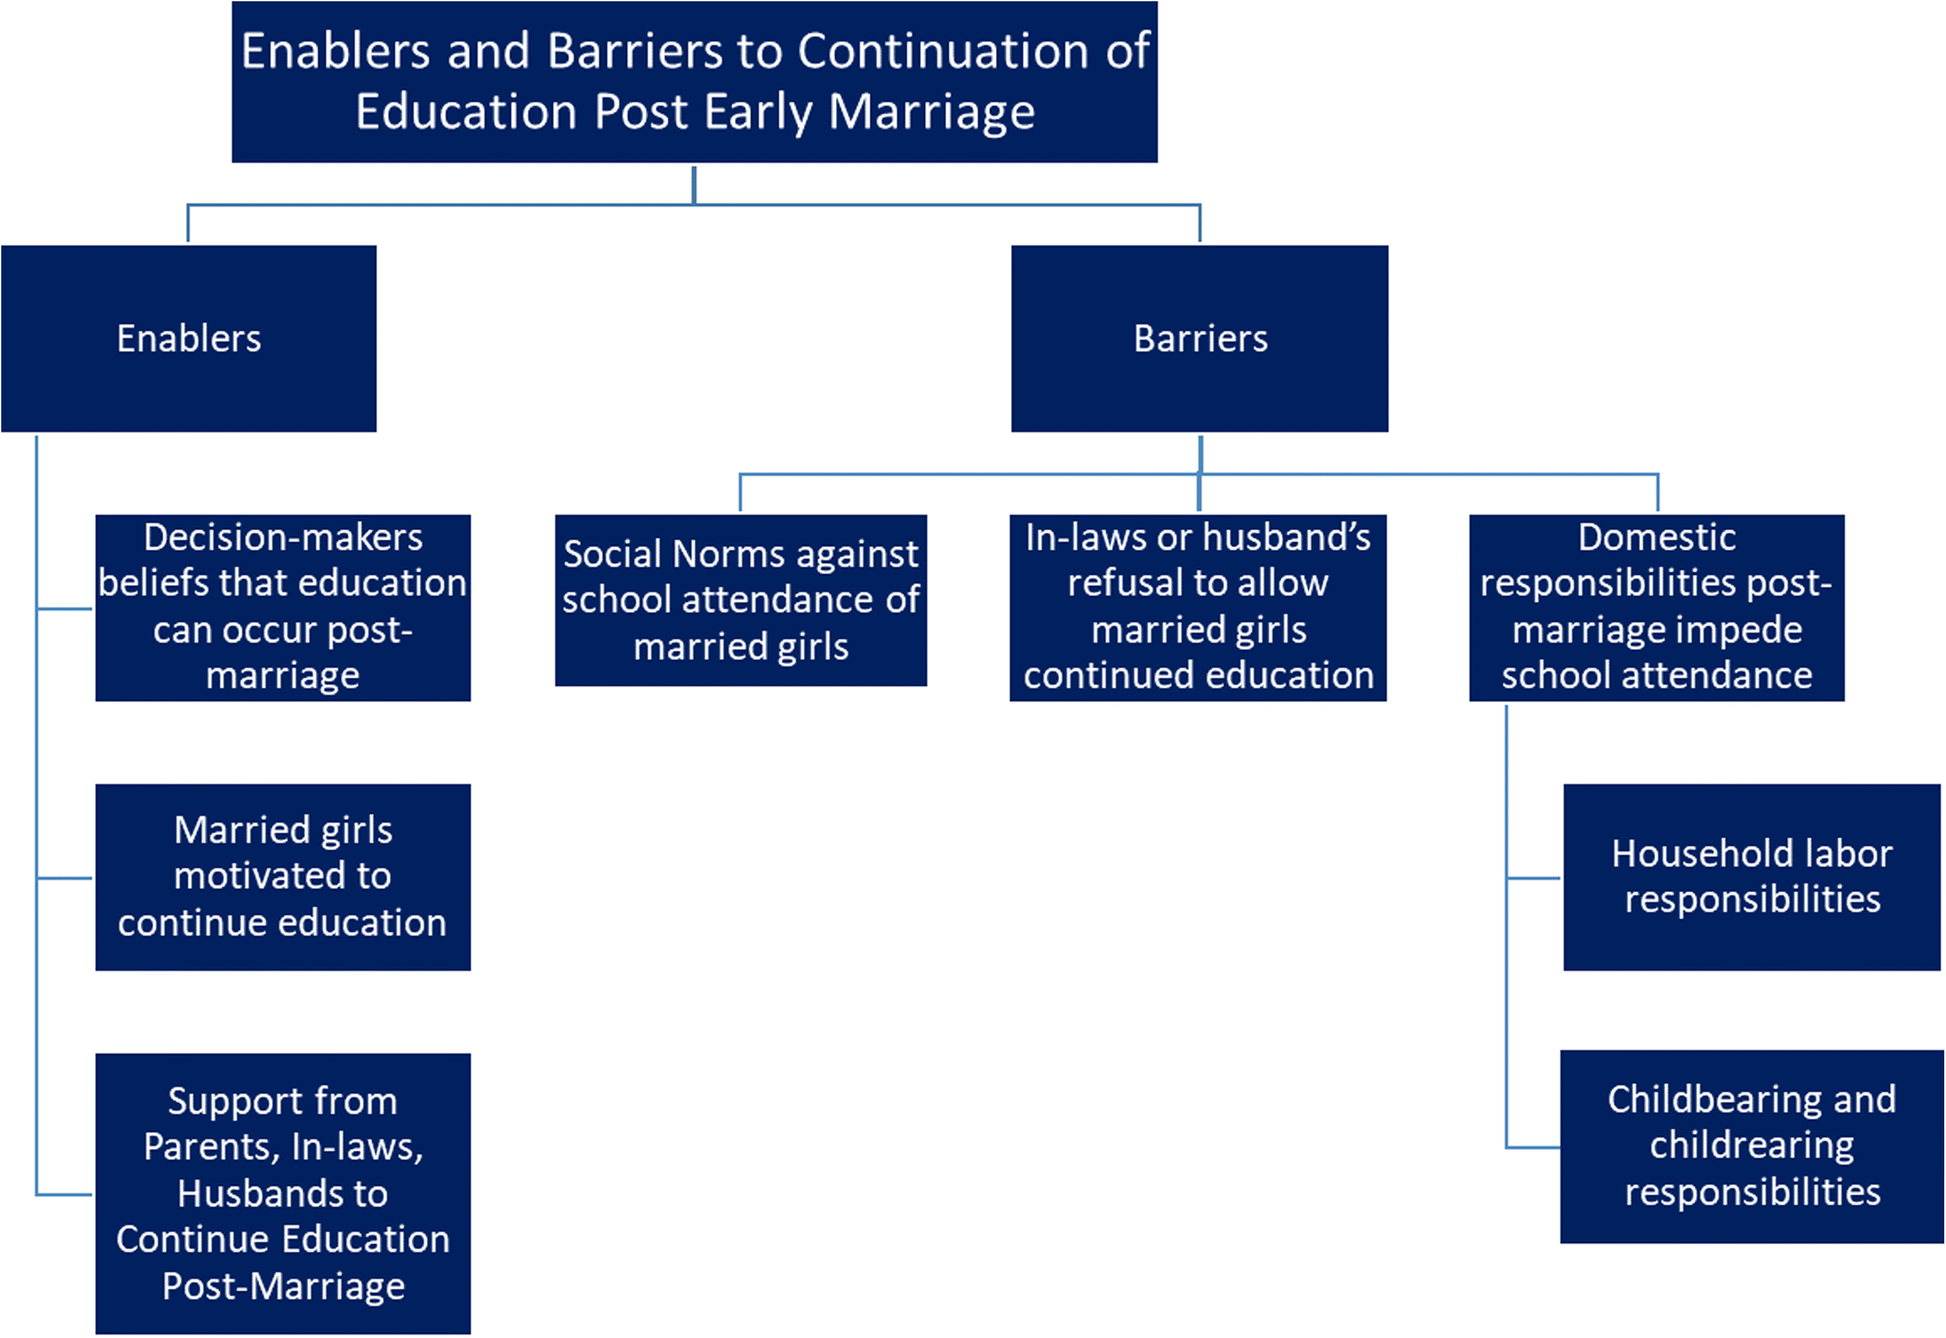 Figure 1: Enablers and barriers to continuation of girls’ education post-marriage; Source: BMC Public Health, https://doi.org/10.1186/s12889-018-6340-6